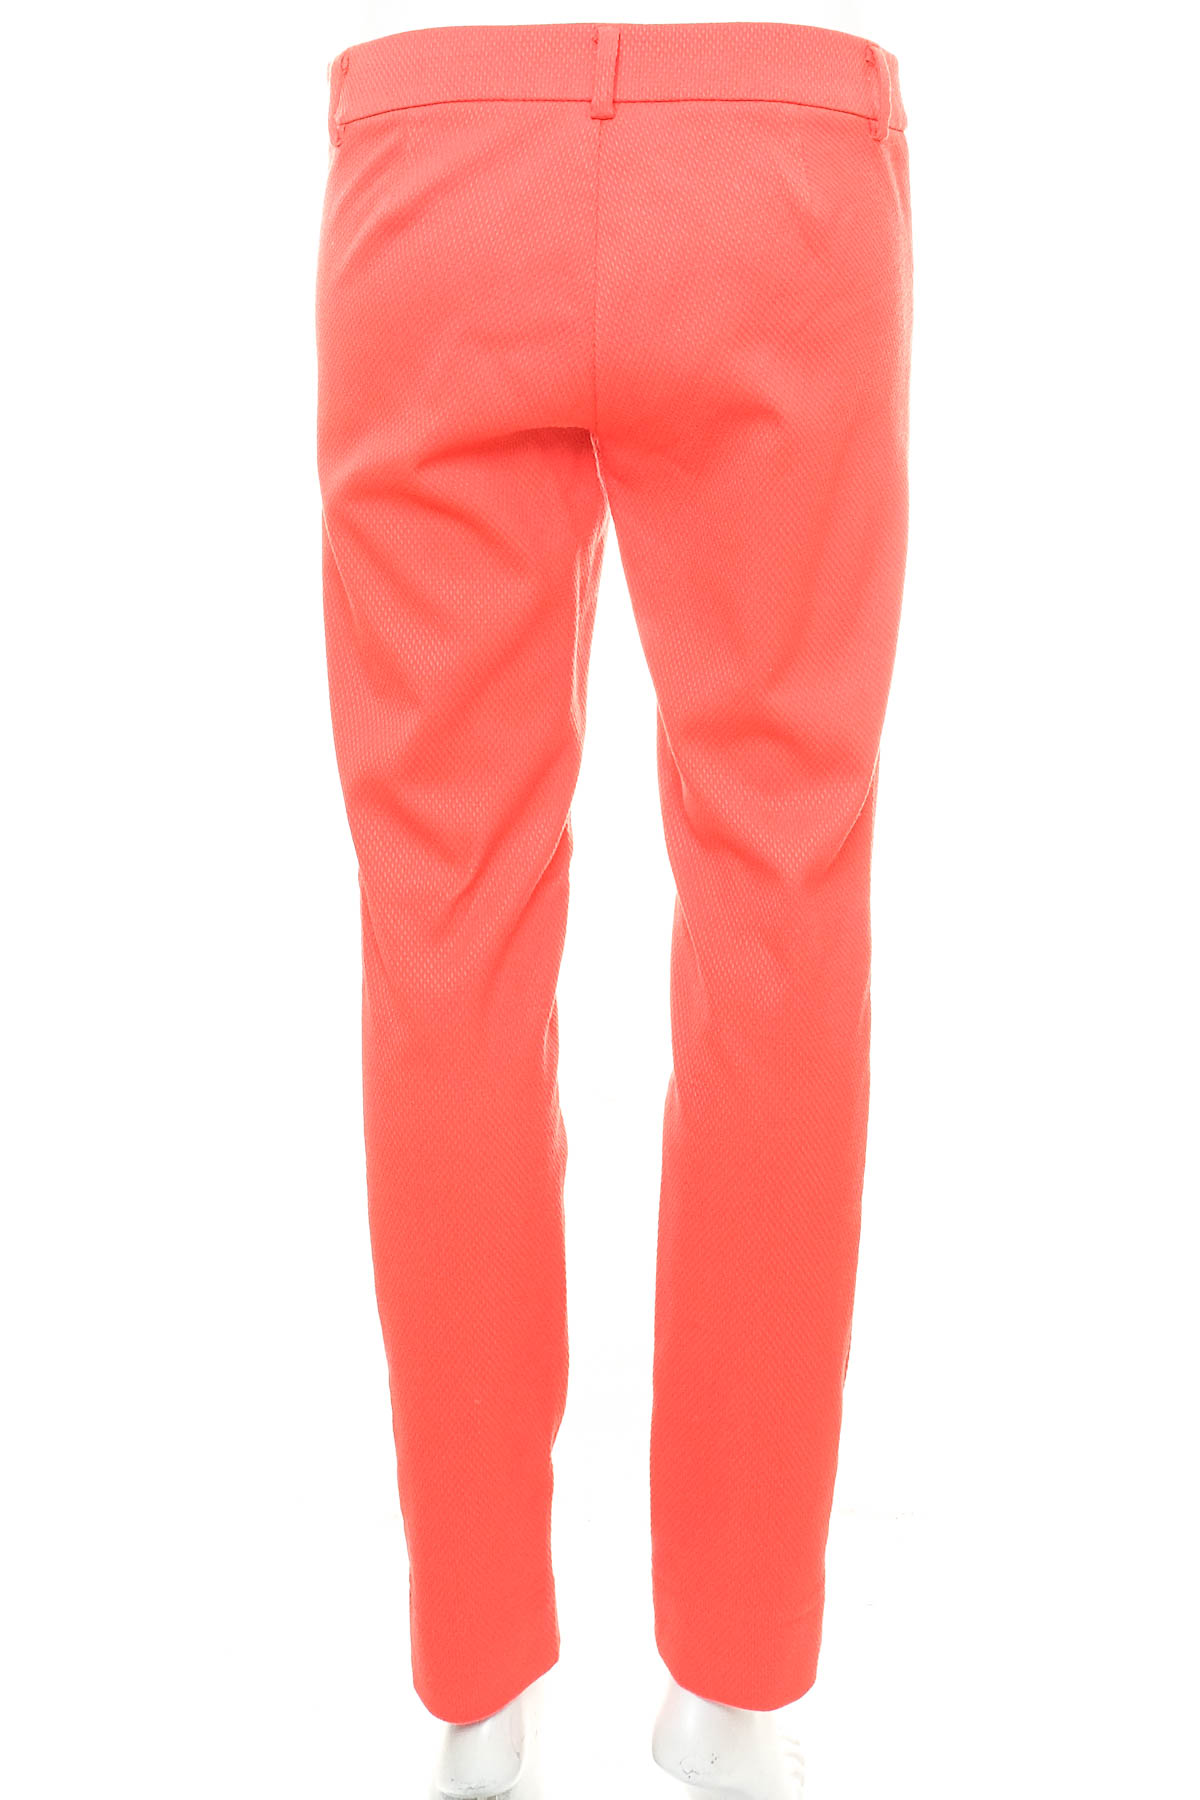 Women's trousers - United Colors of Benetton - 1